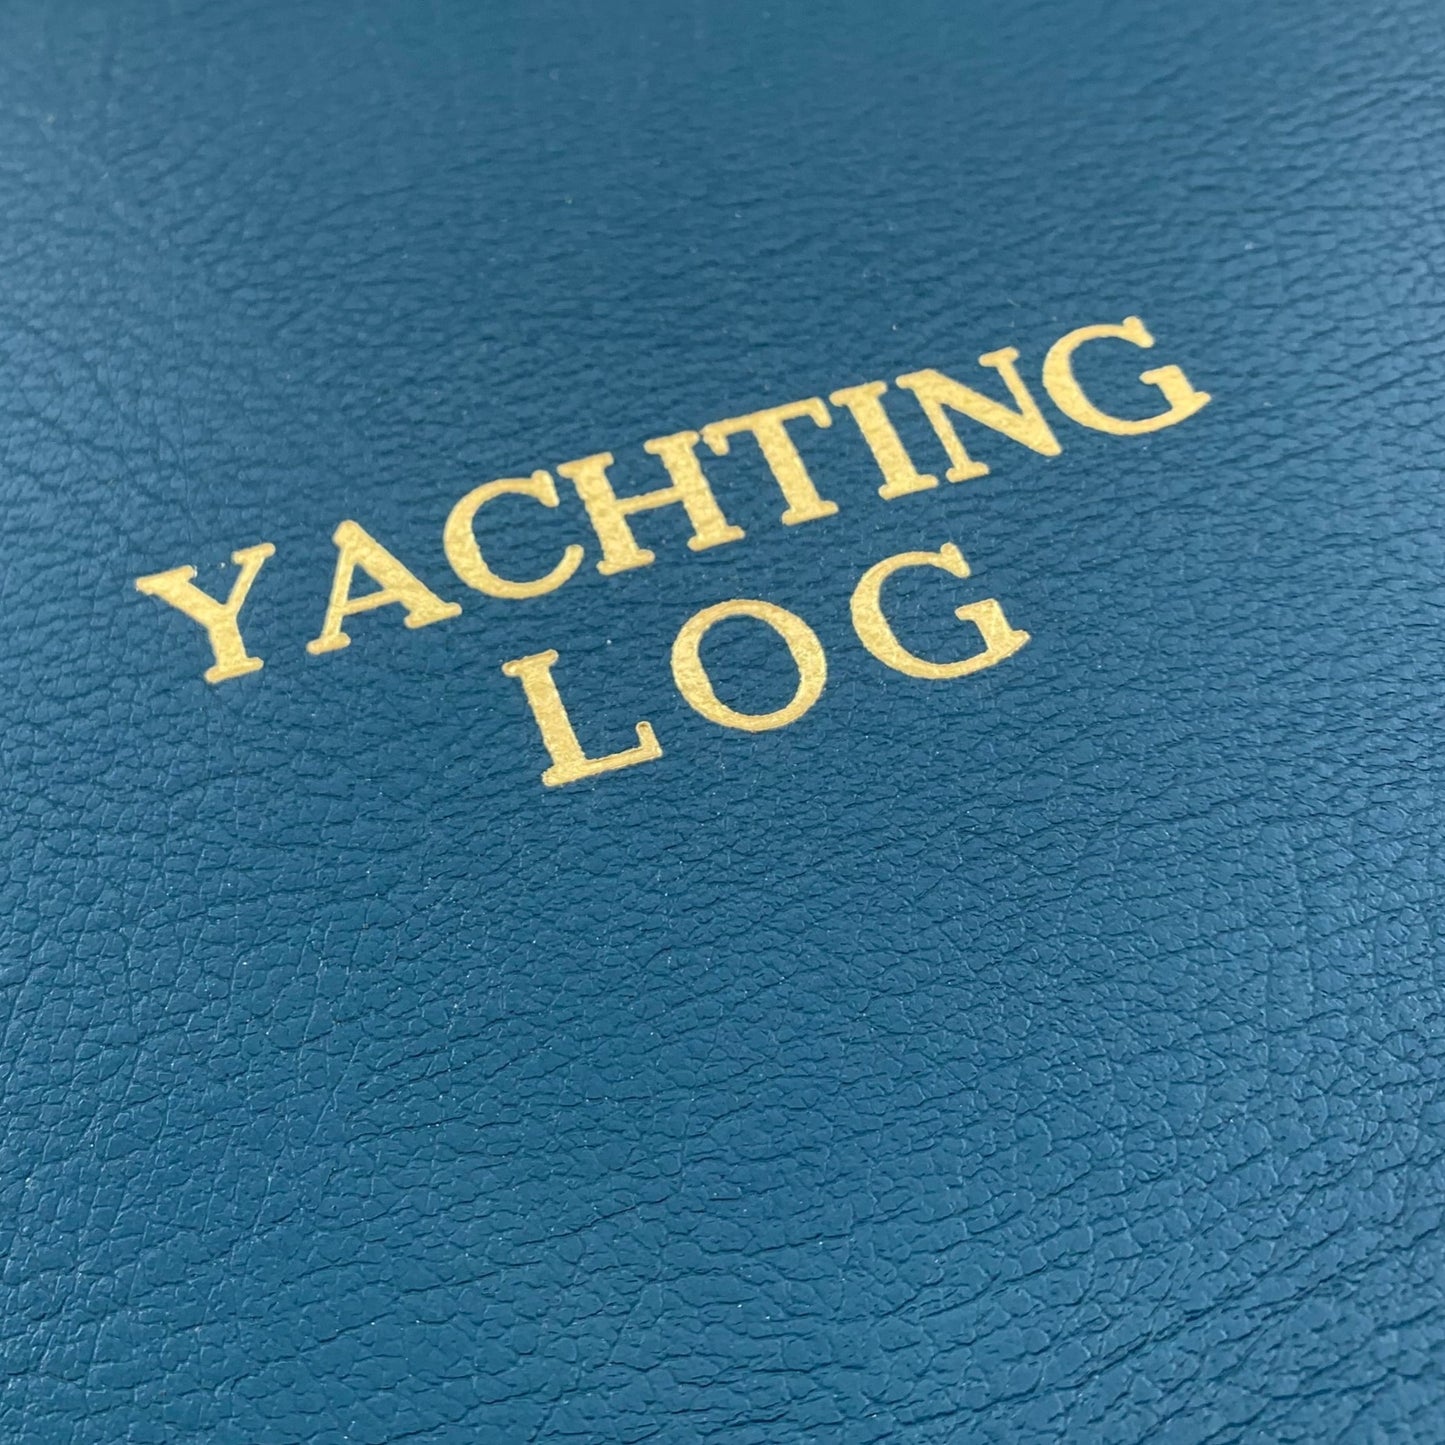 Yachting Log, Navy Calf Leather